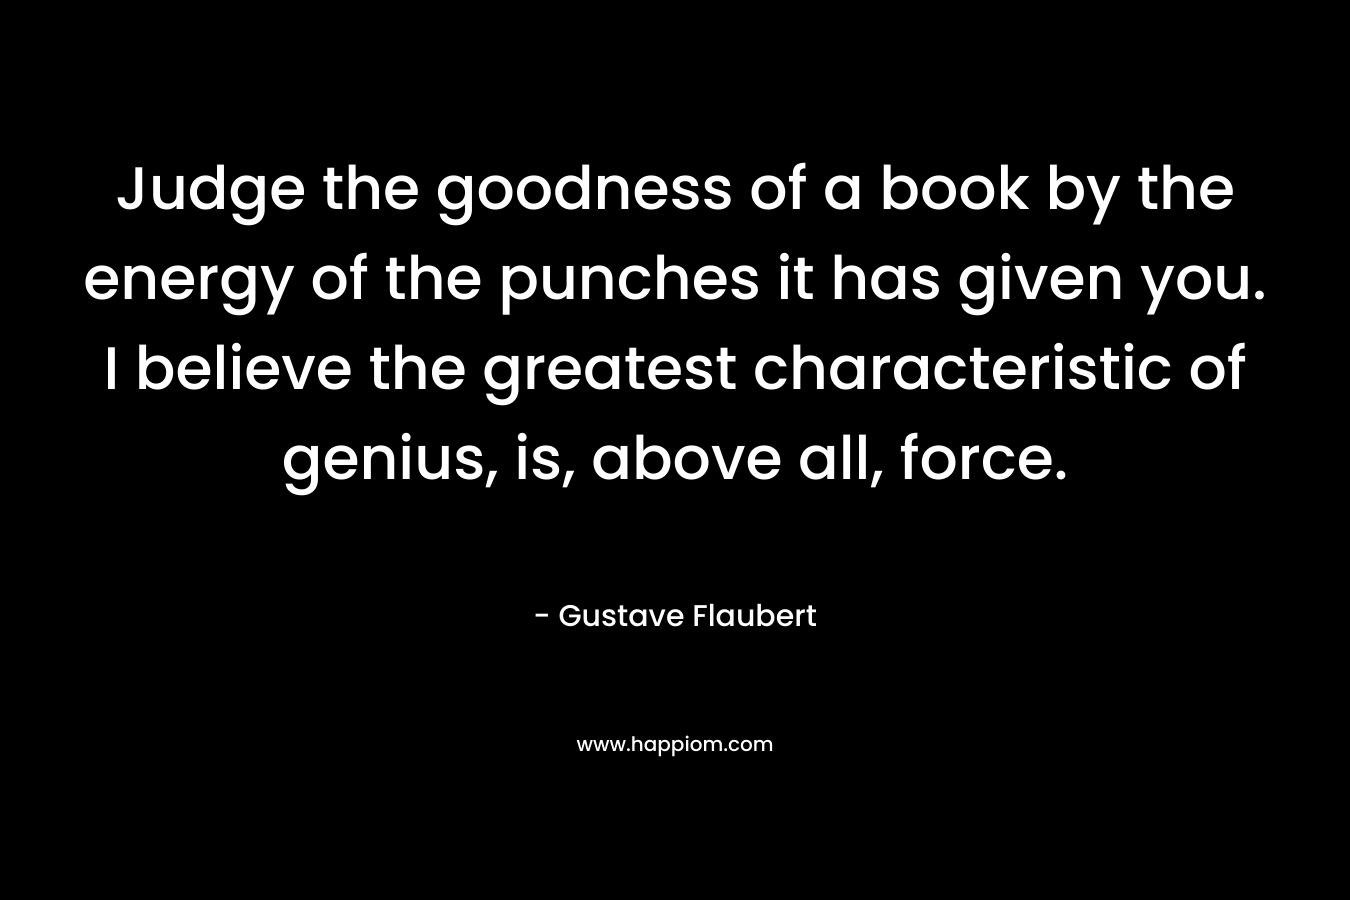 Judge the goodness of a book by the energy of the punches it has given you. I believe the greatest characteristic of genius, is, above all, force.